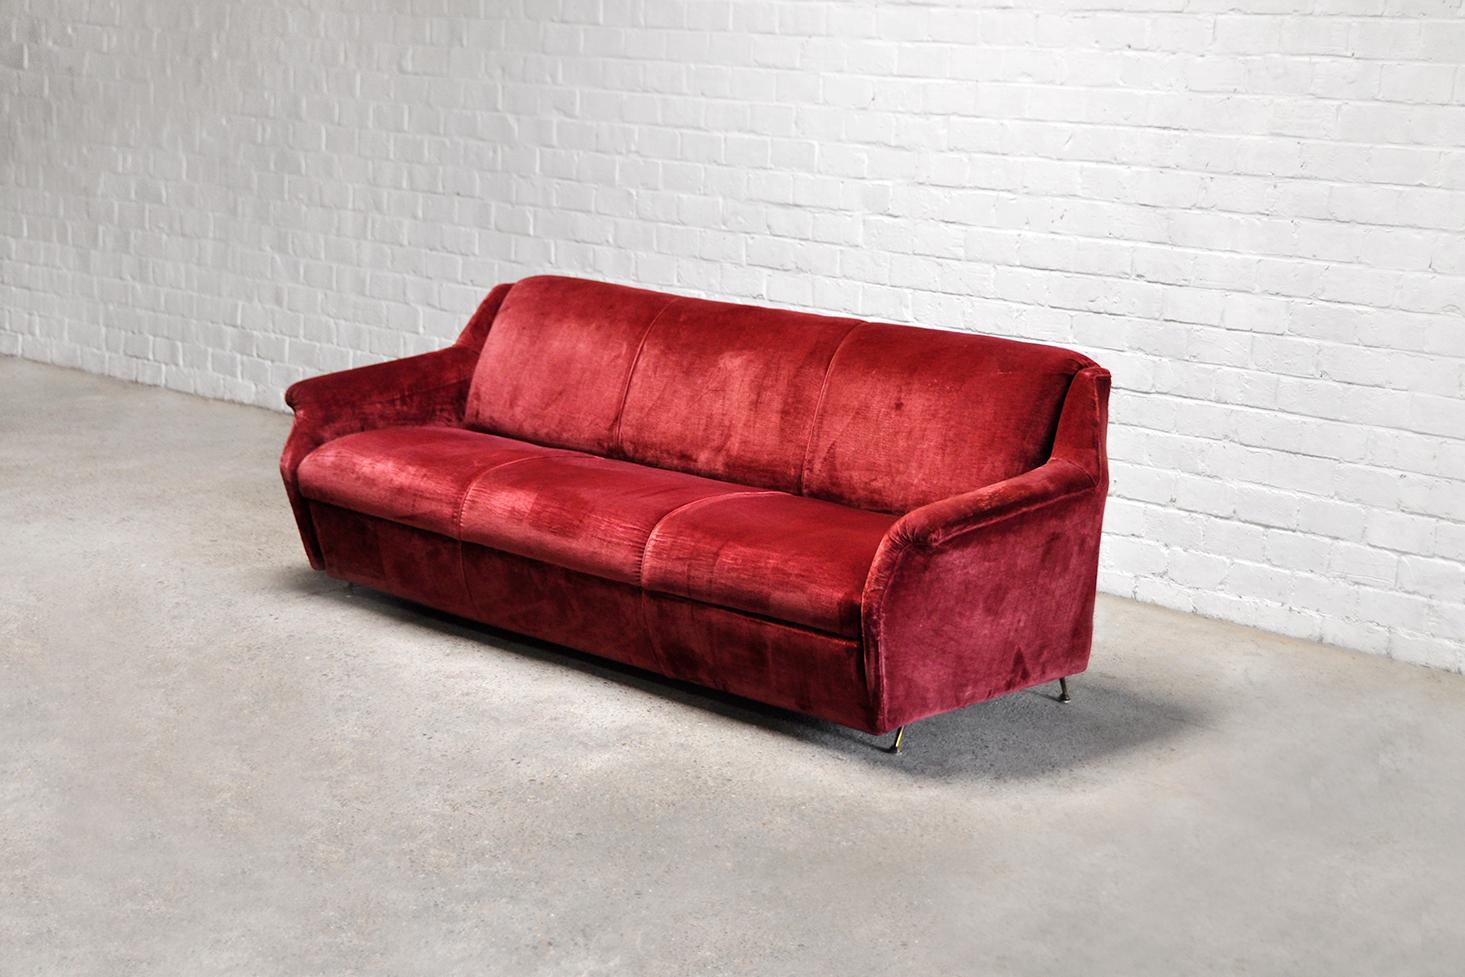 A mid-century italian designer sofa from the 1950’s. Upholstered in a maroon red velvet with an interesting angular design and splayed patinated brass legs. Beatifully shaped appearance and form.

Wear consistent with age and use. The original